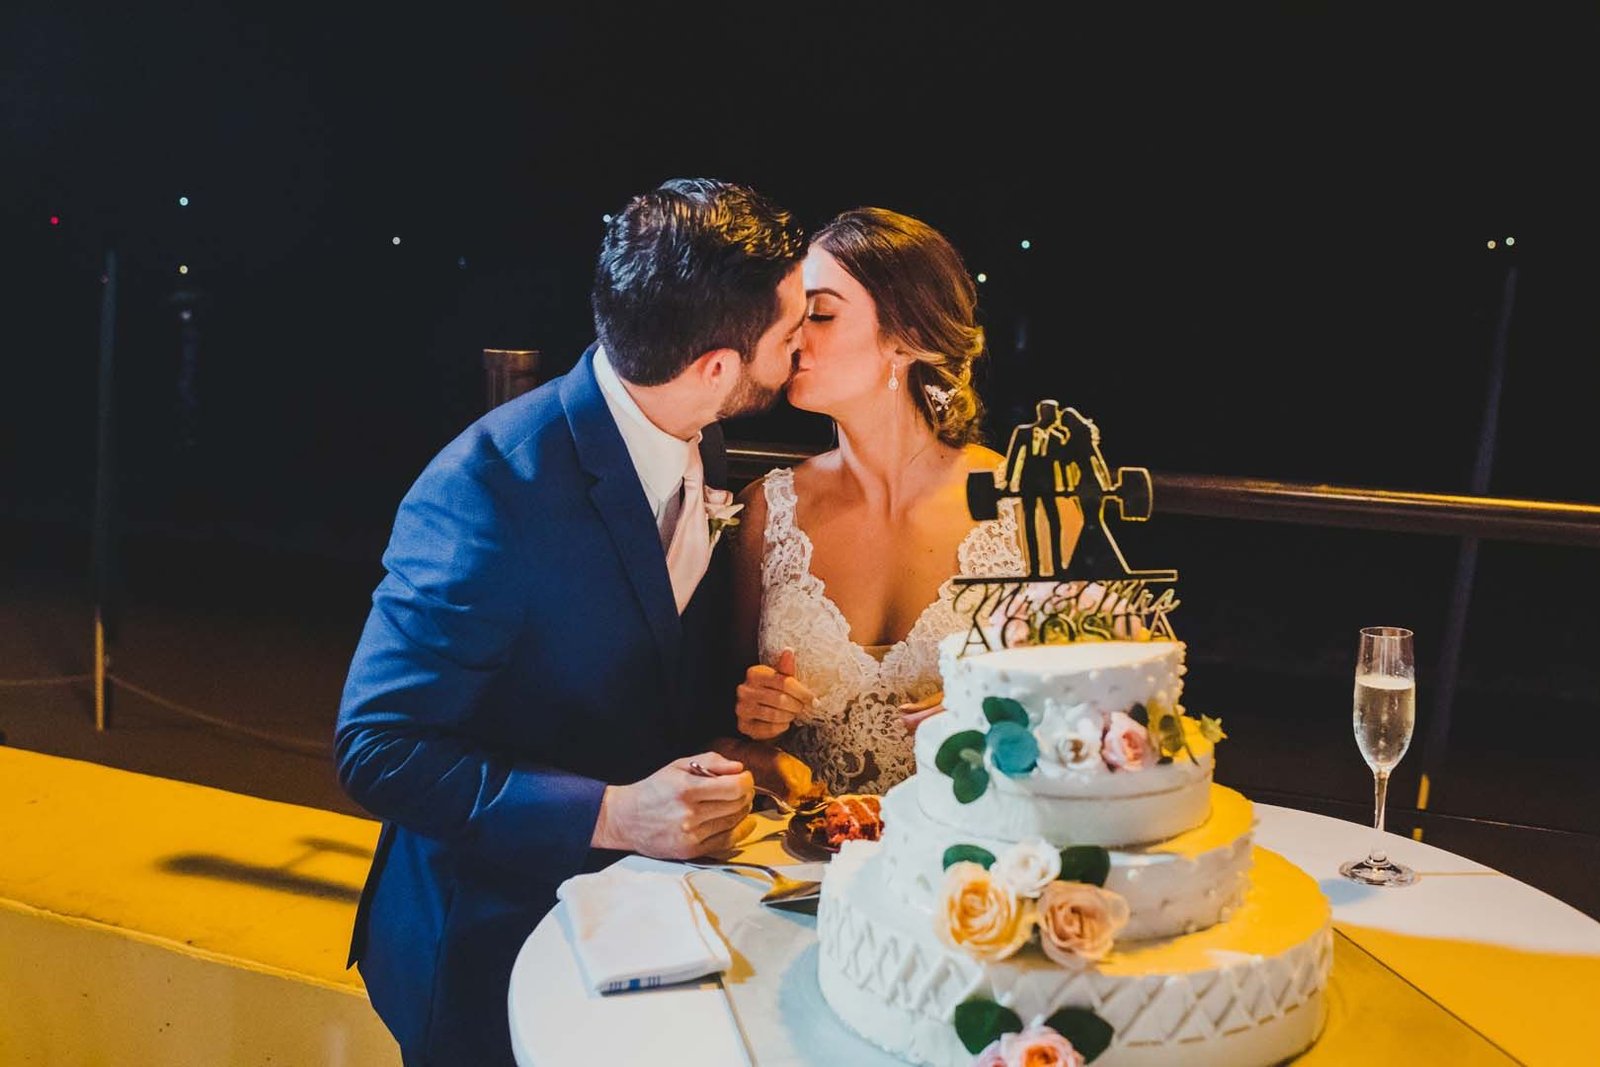 Bride and Groom during their Cake Cutting at their Wedding. Their Wedding took place at the Villa Group in Los Cabos Mexico.